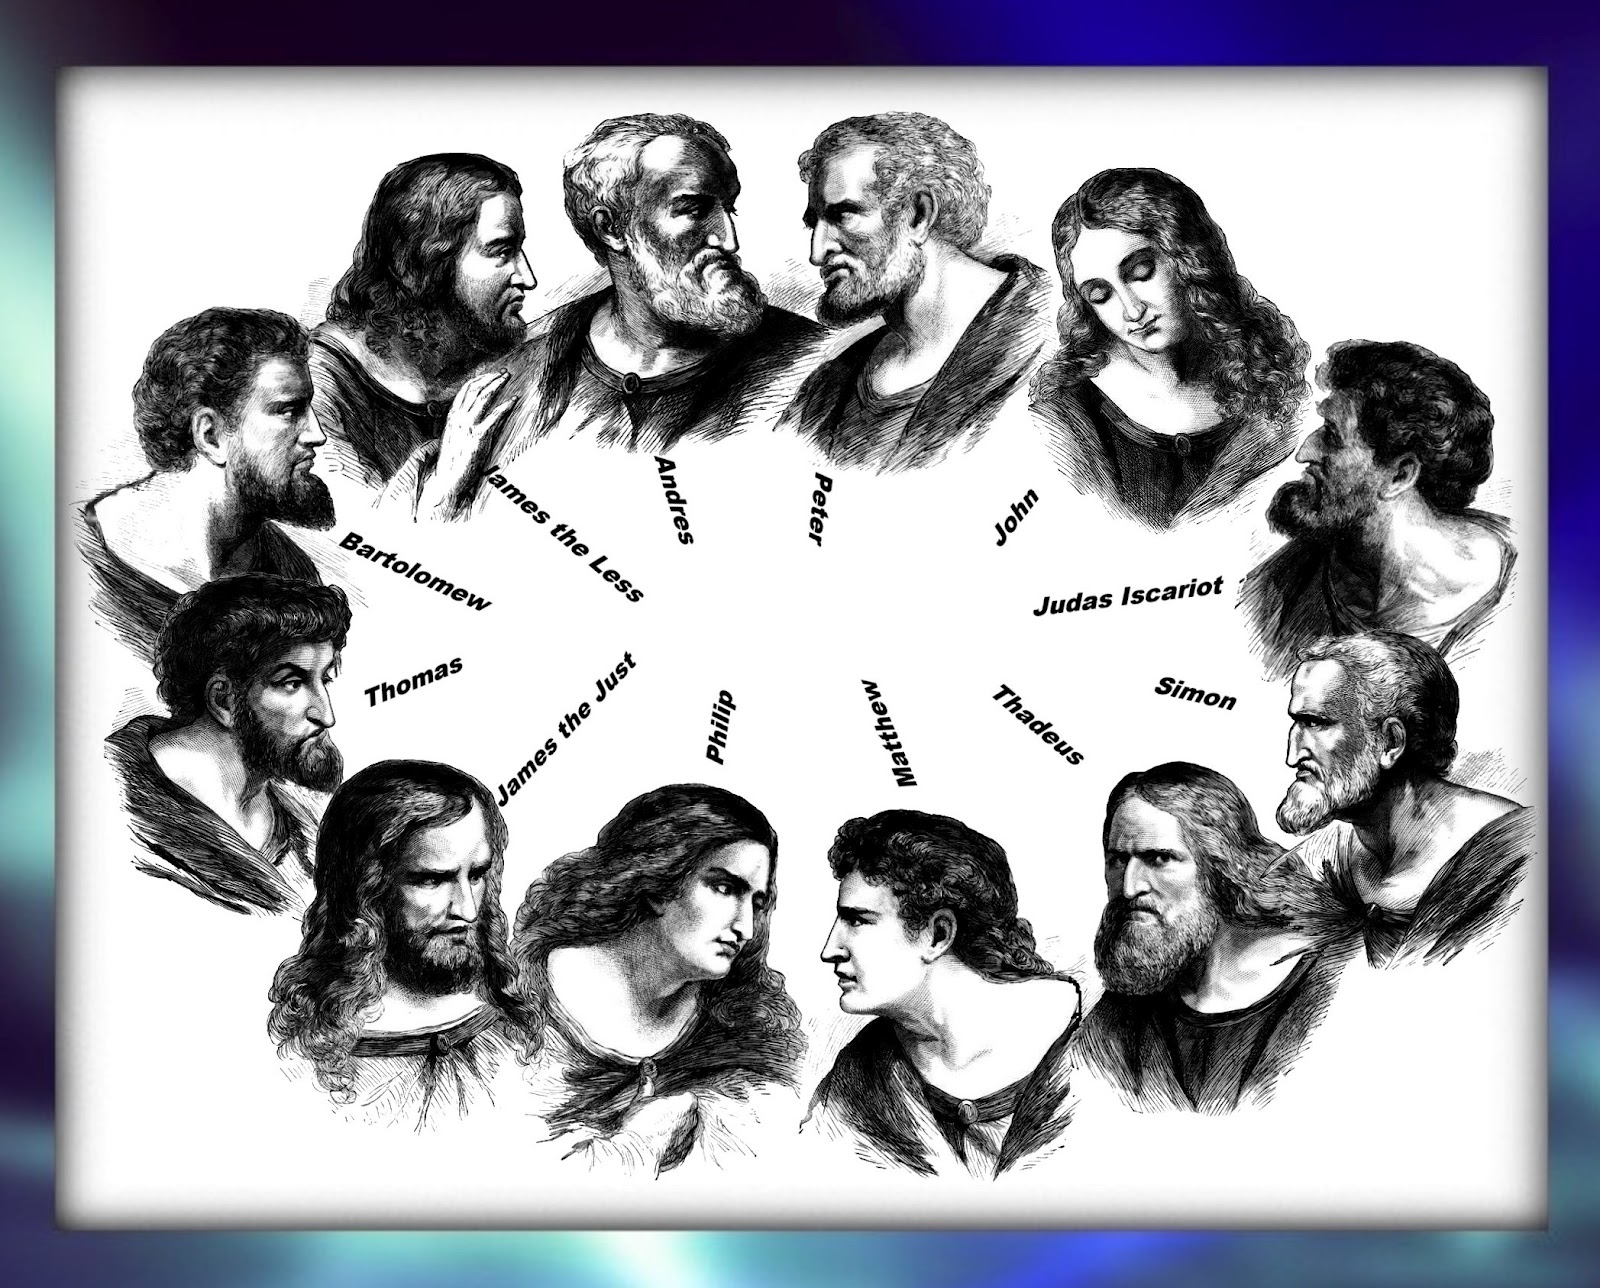 faith-hope-belief-prayers-miracles-who-are-the-12-apostles-of-jesus-christ